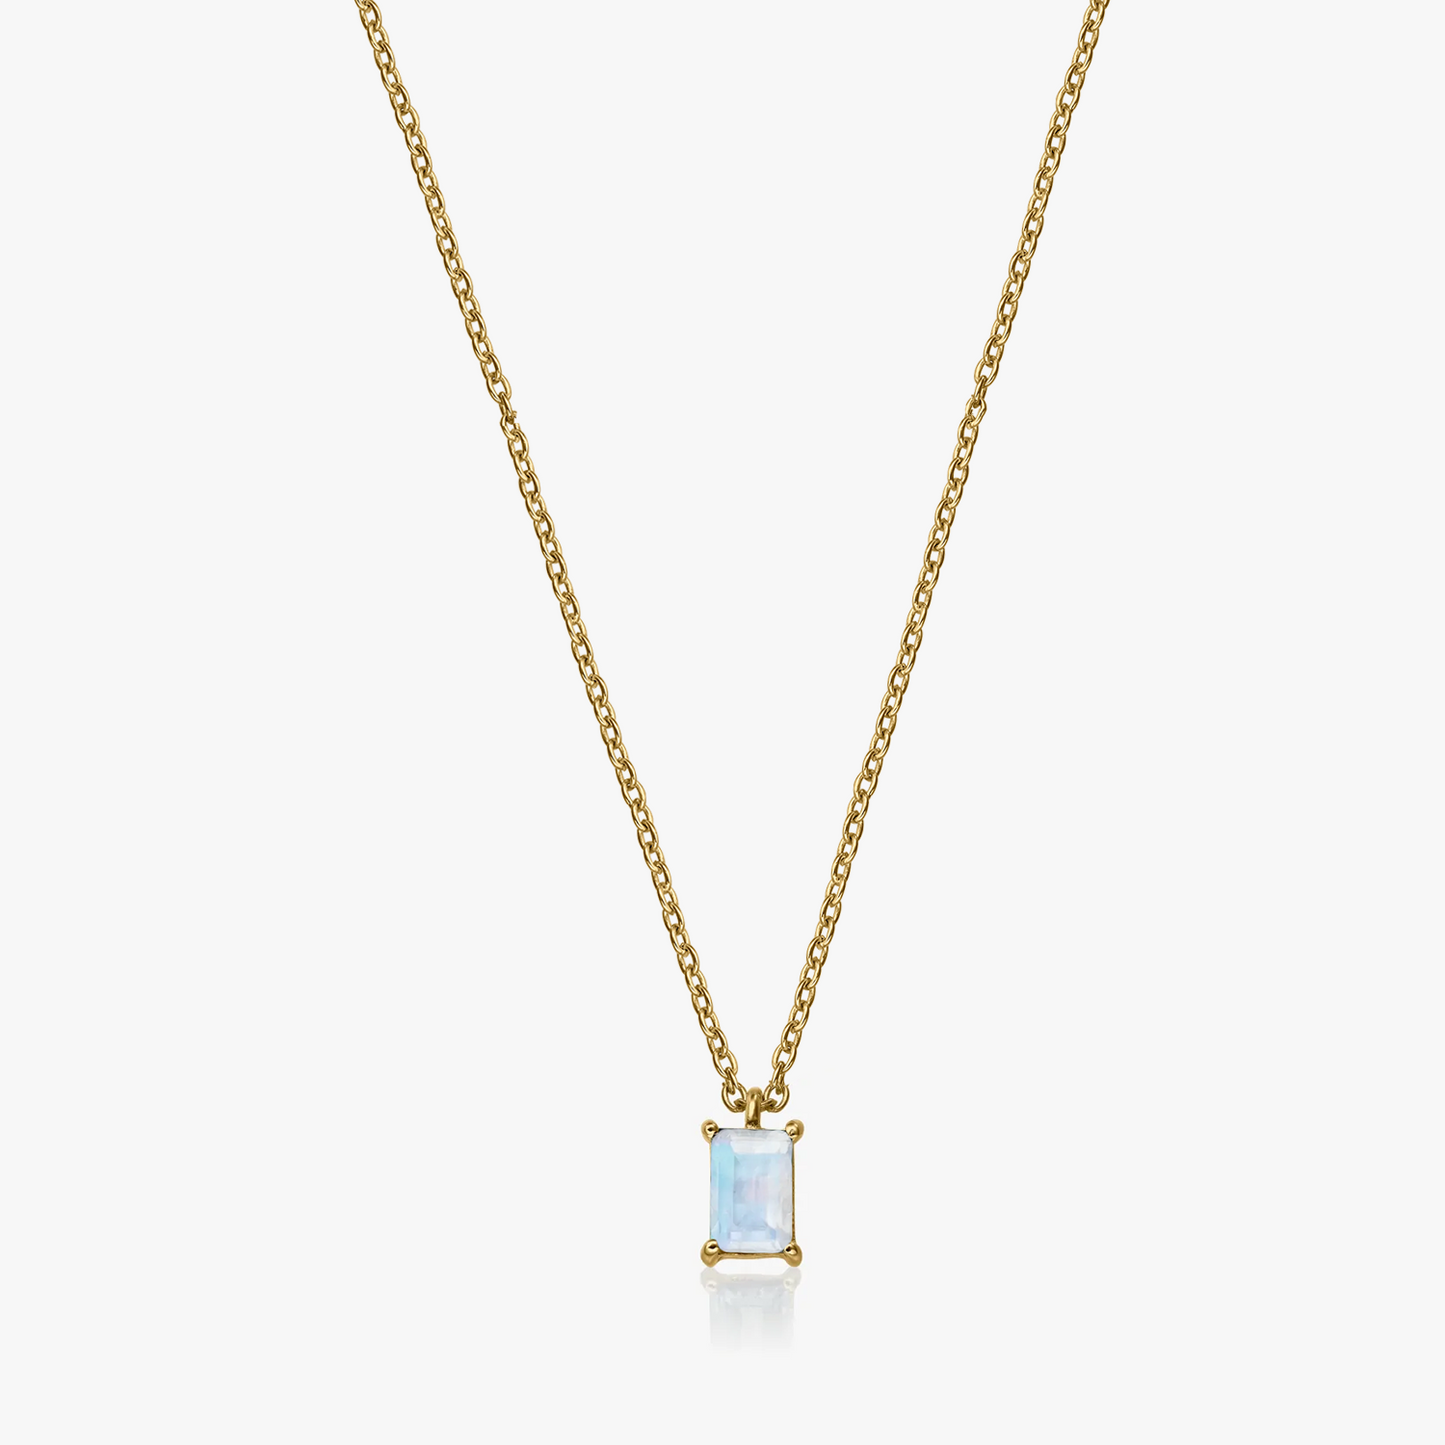 Golden Tonic silver necklace – Moonstone